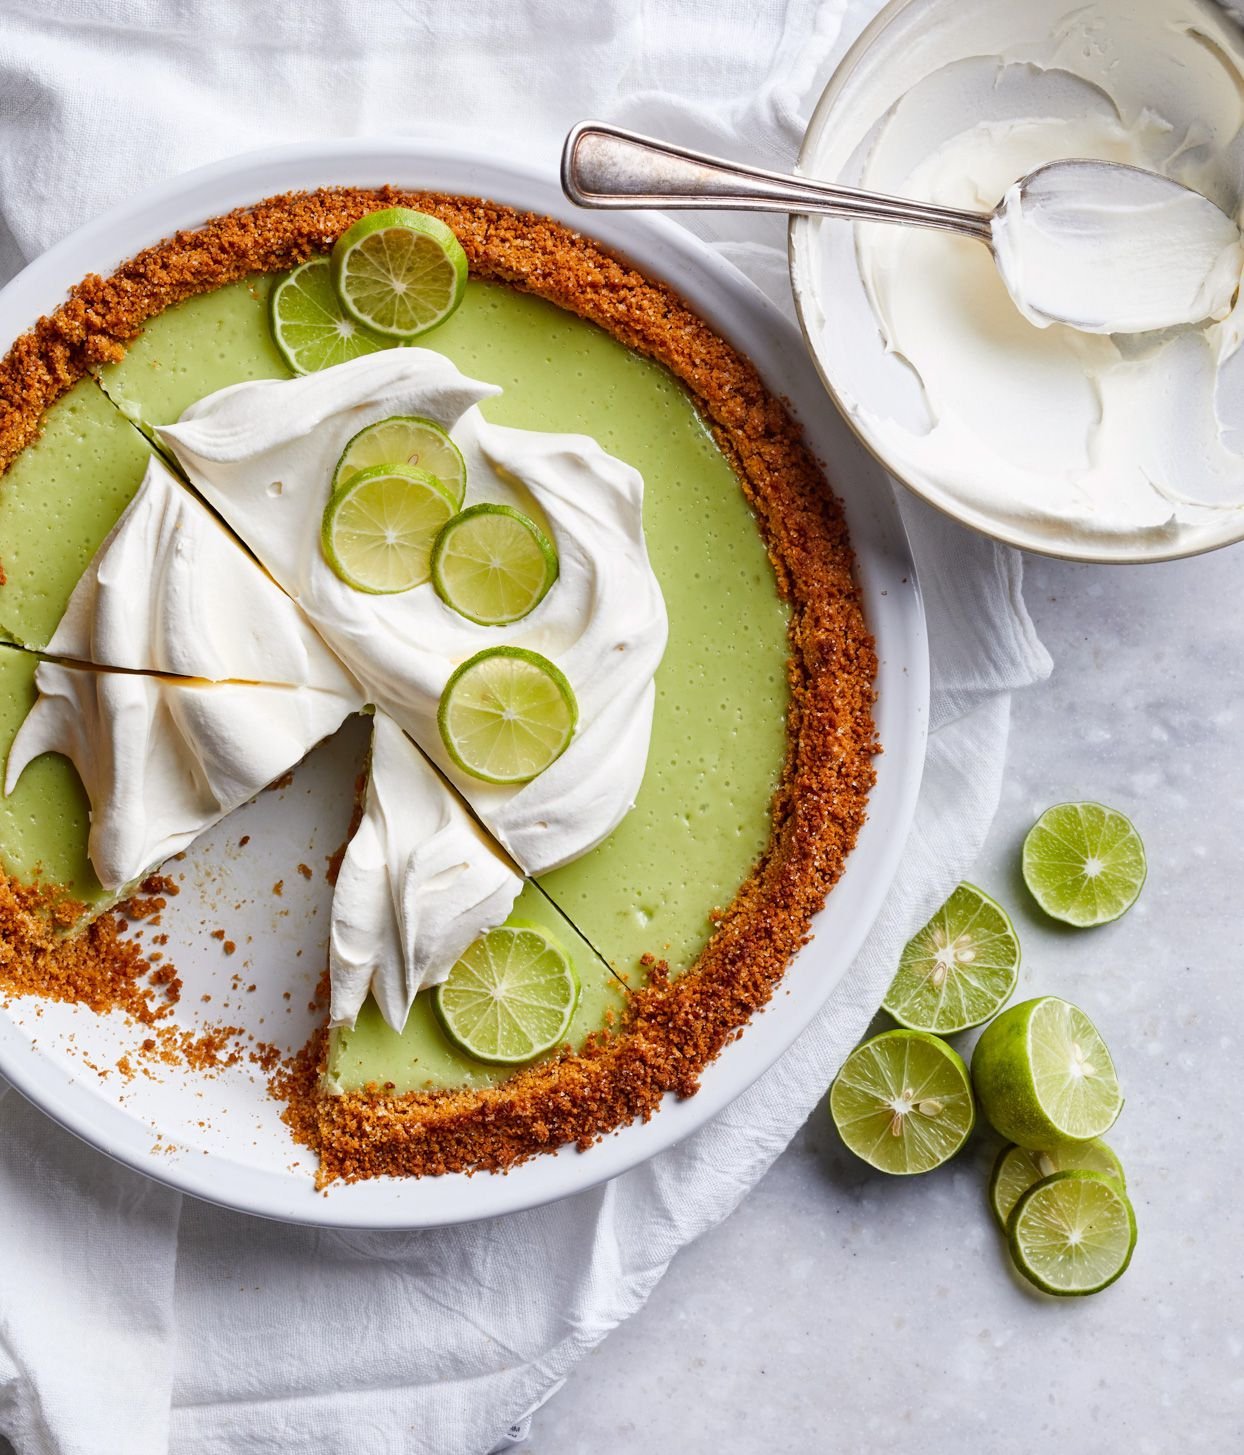 13 Graham Cracker Crust Pie Recipes That Couldn't Be More Delicious